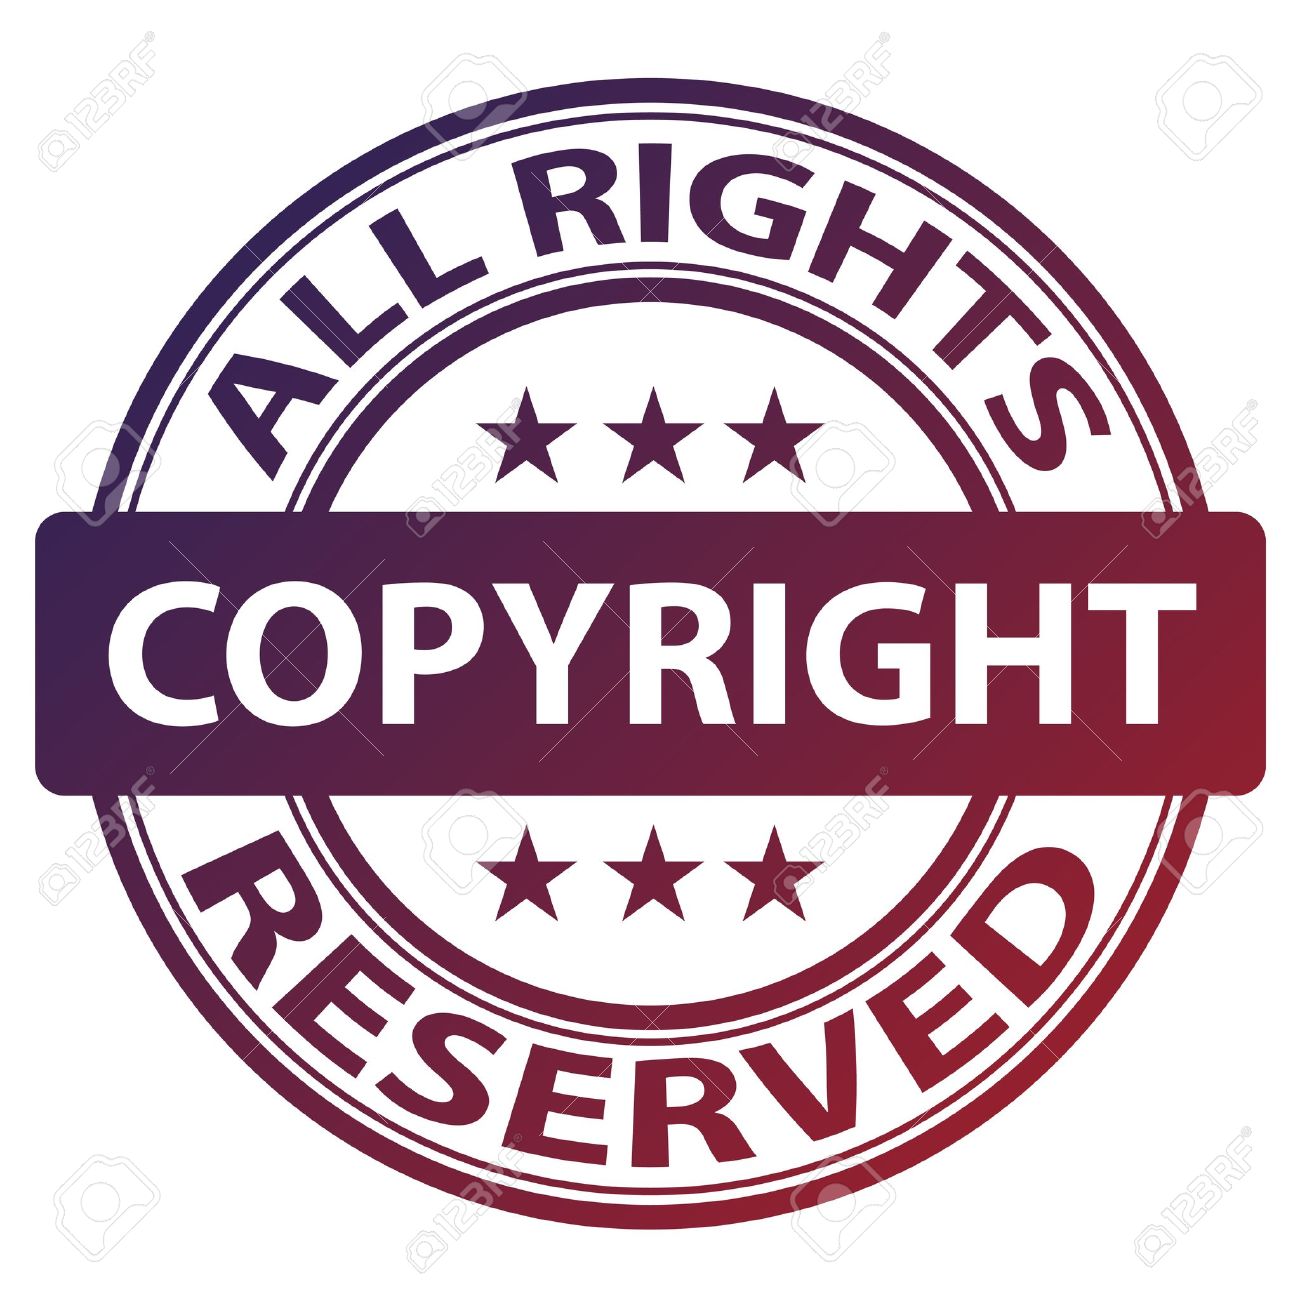 11504080-vector-pure-copyright-stamp-Stock-Vector-symbol